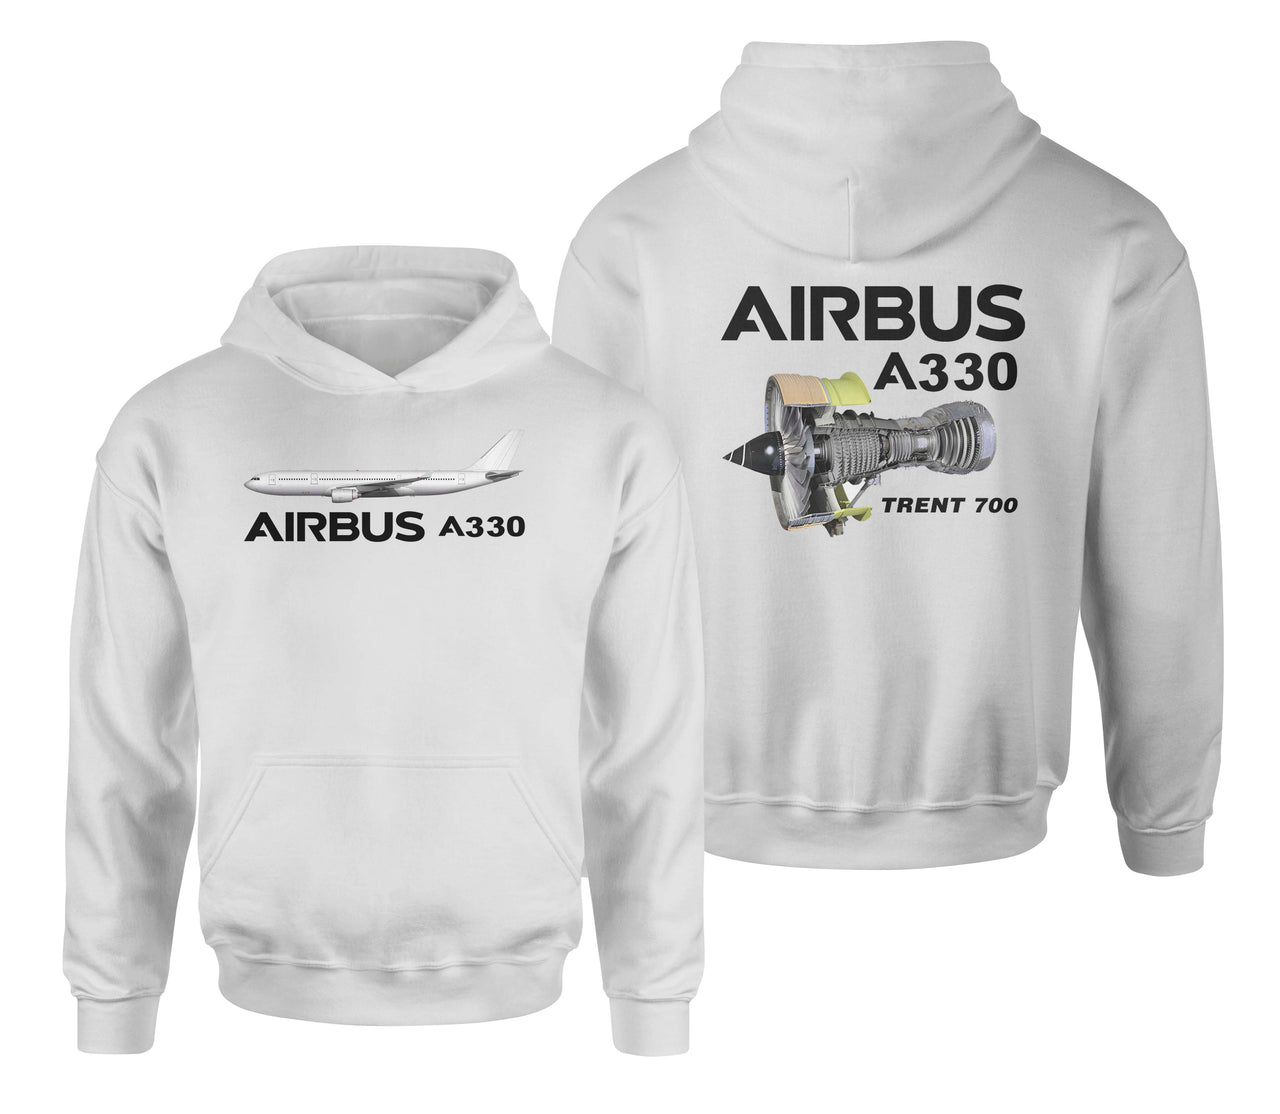 Airbus A330 & Trent 700 Engine Designed Double Side Hoodies